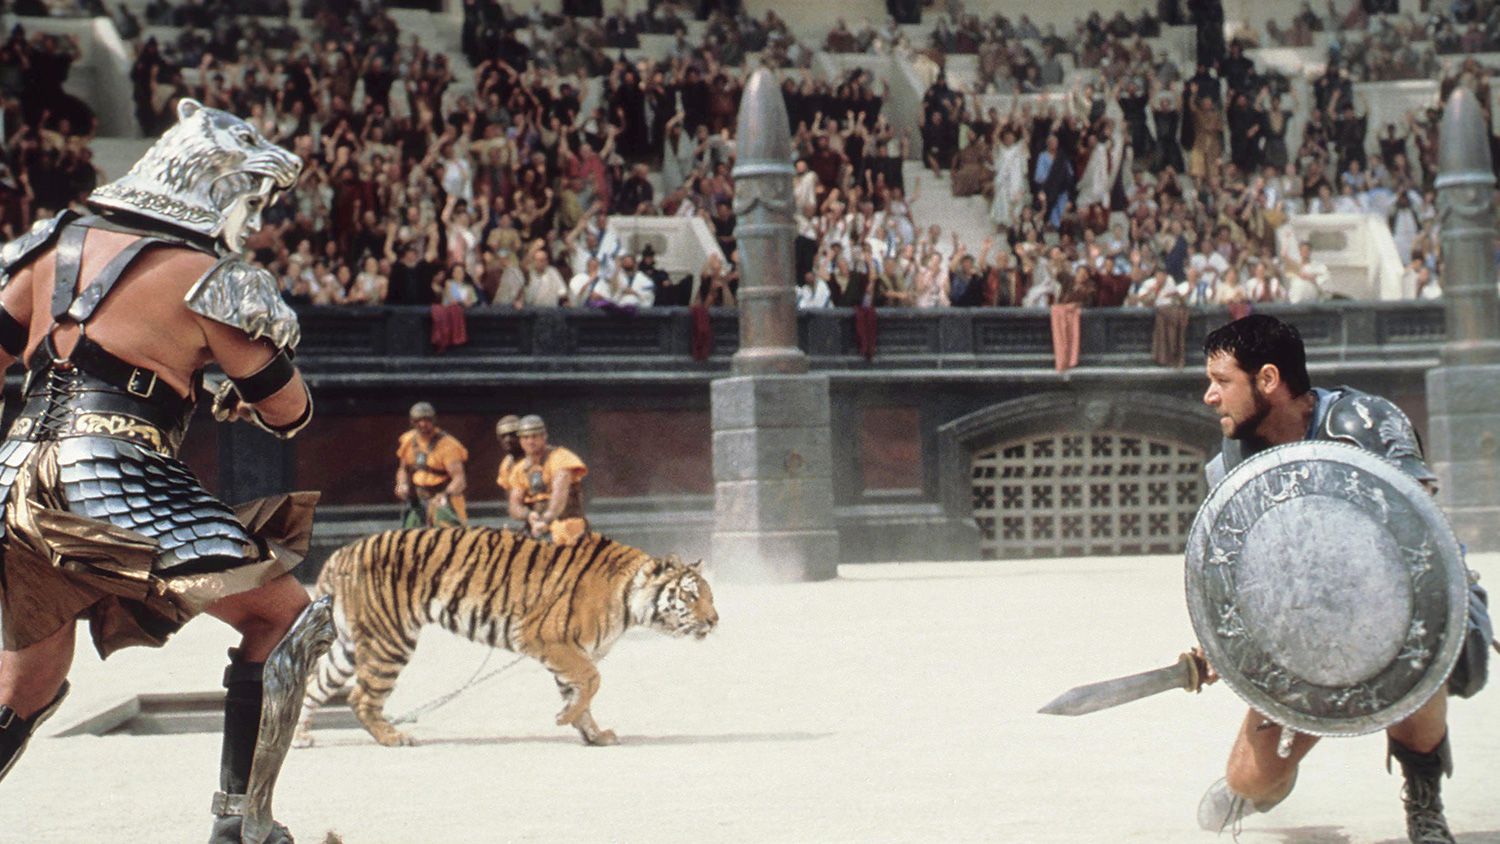 Gladiator is still a cinematic masterpiece 22 years down the line